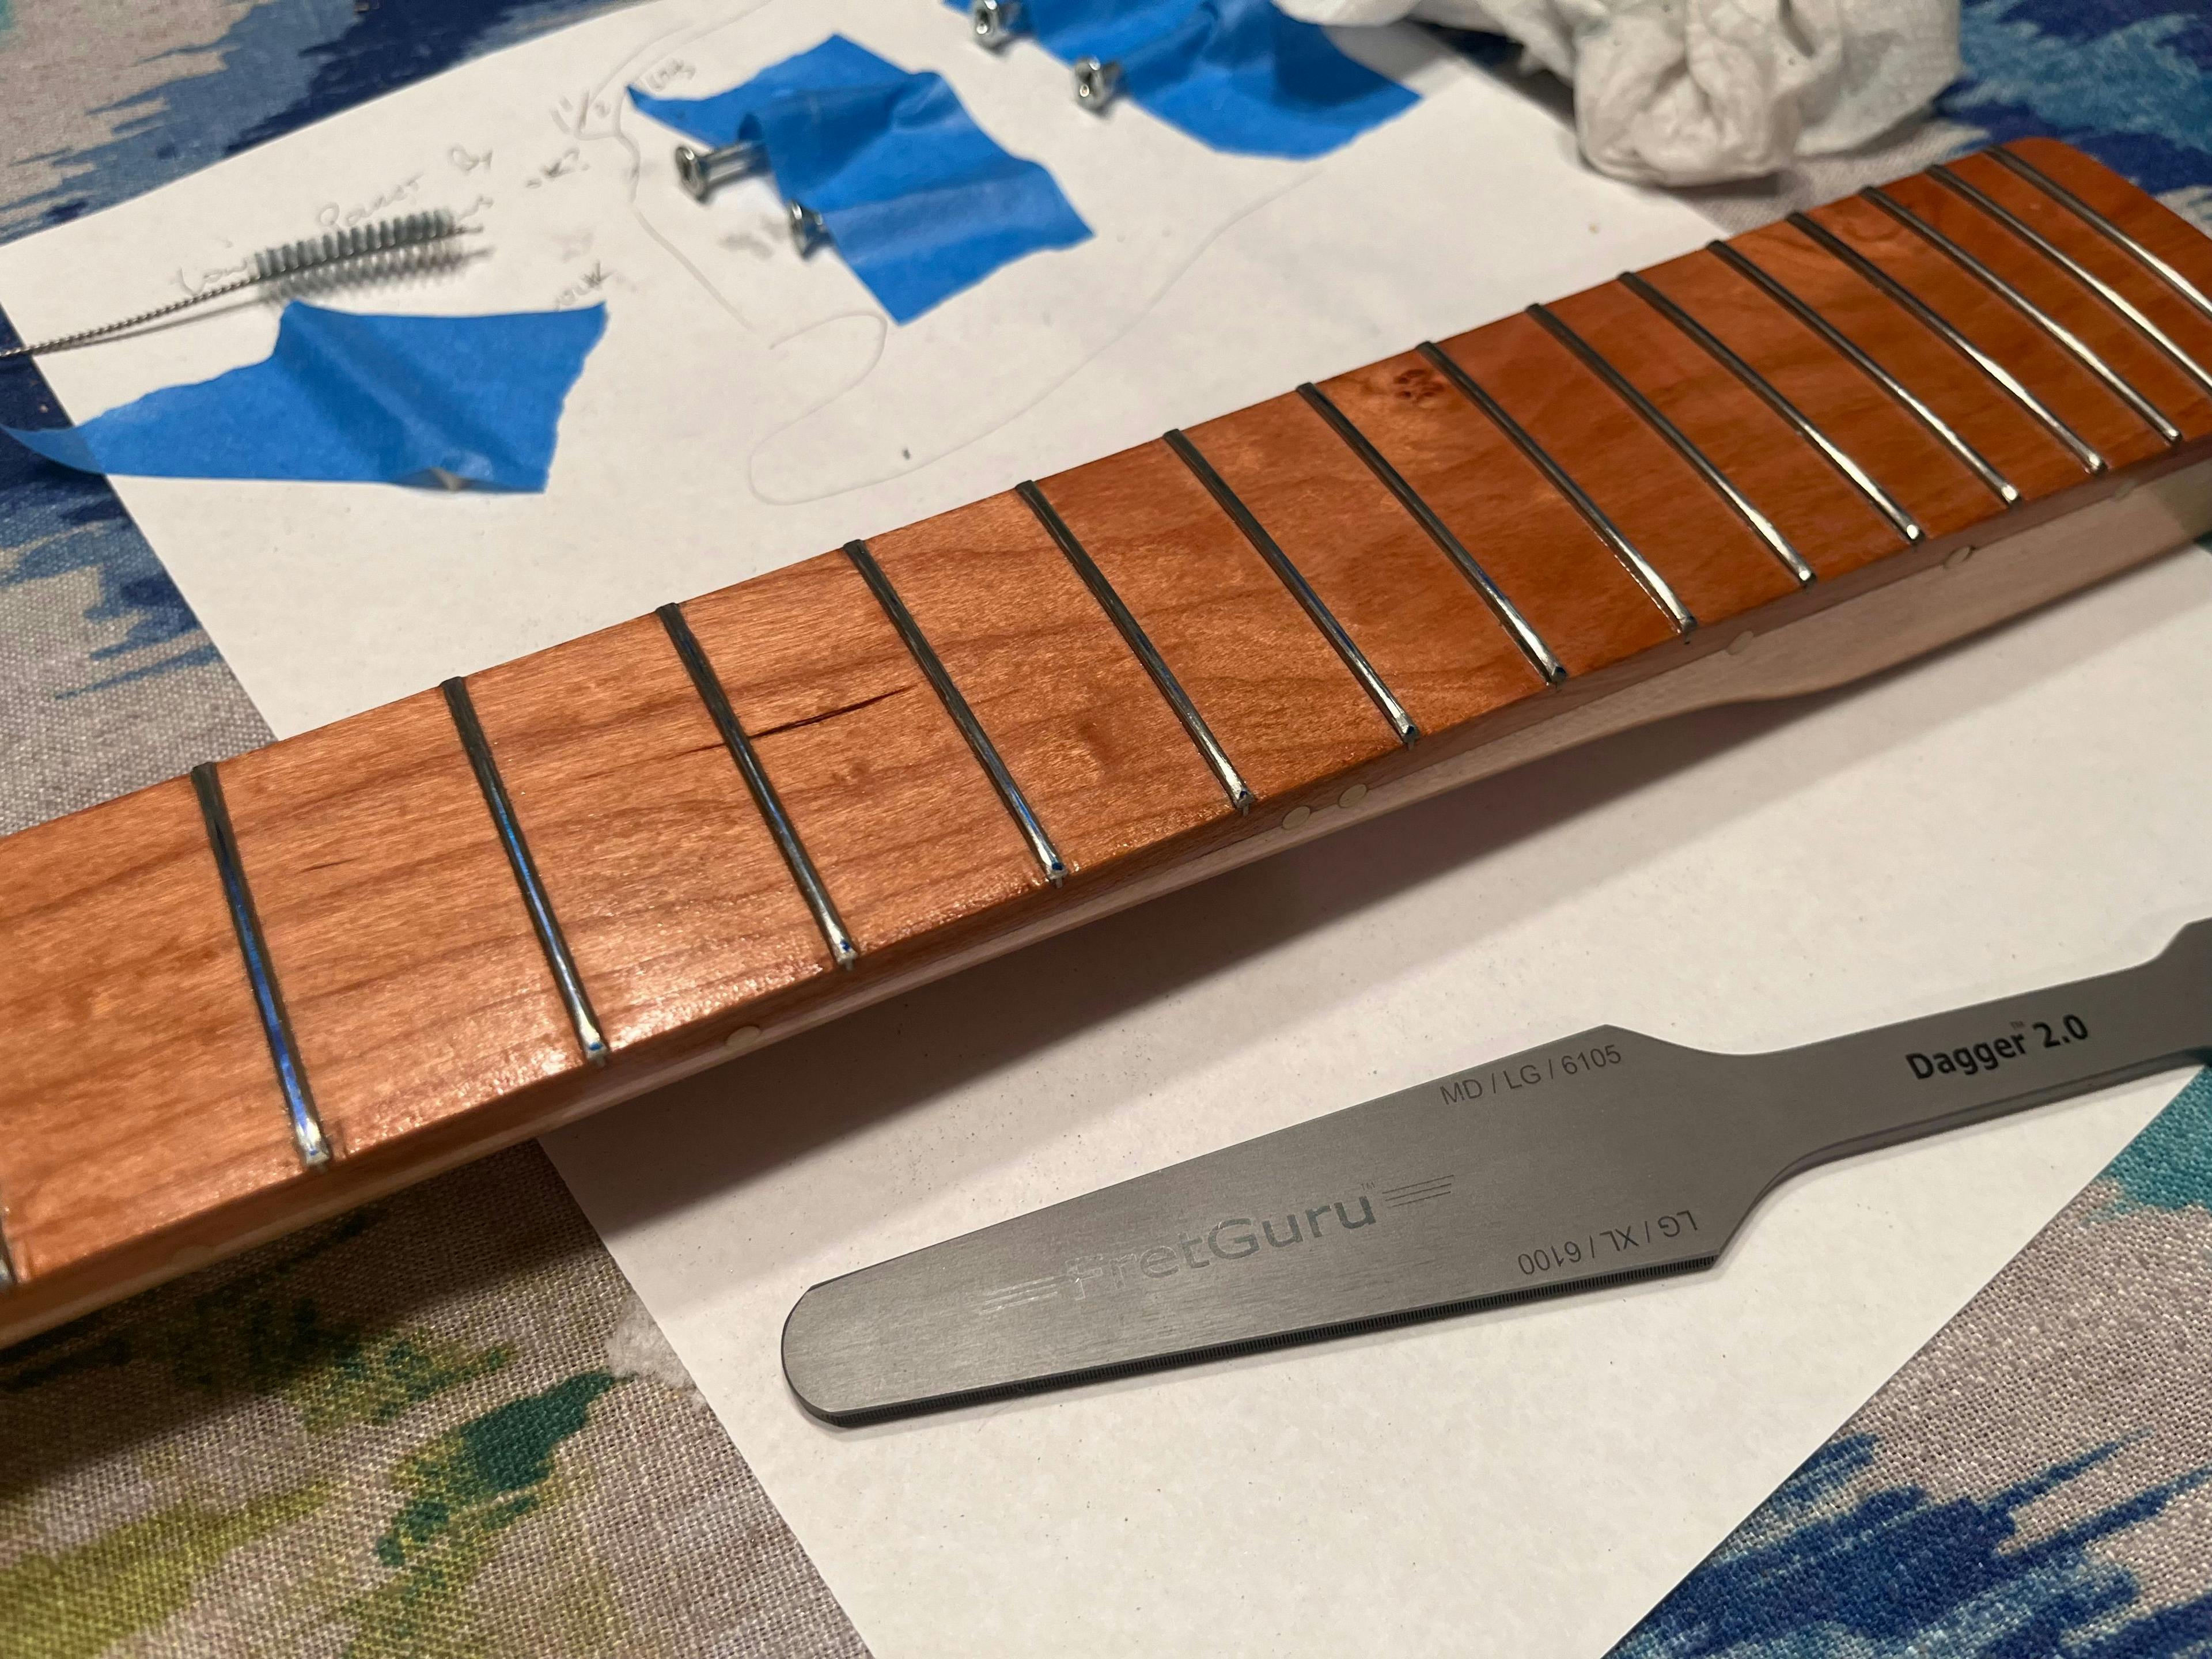 Crowning the frets